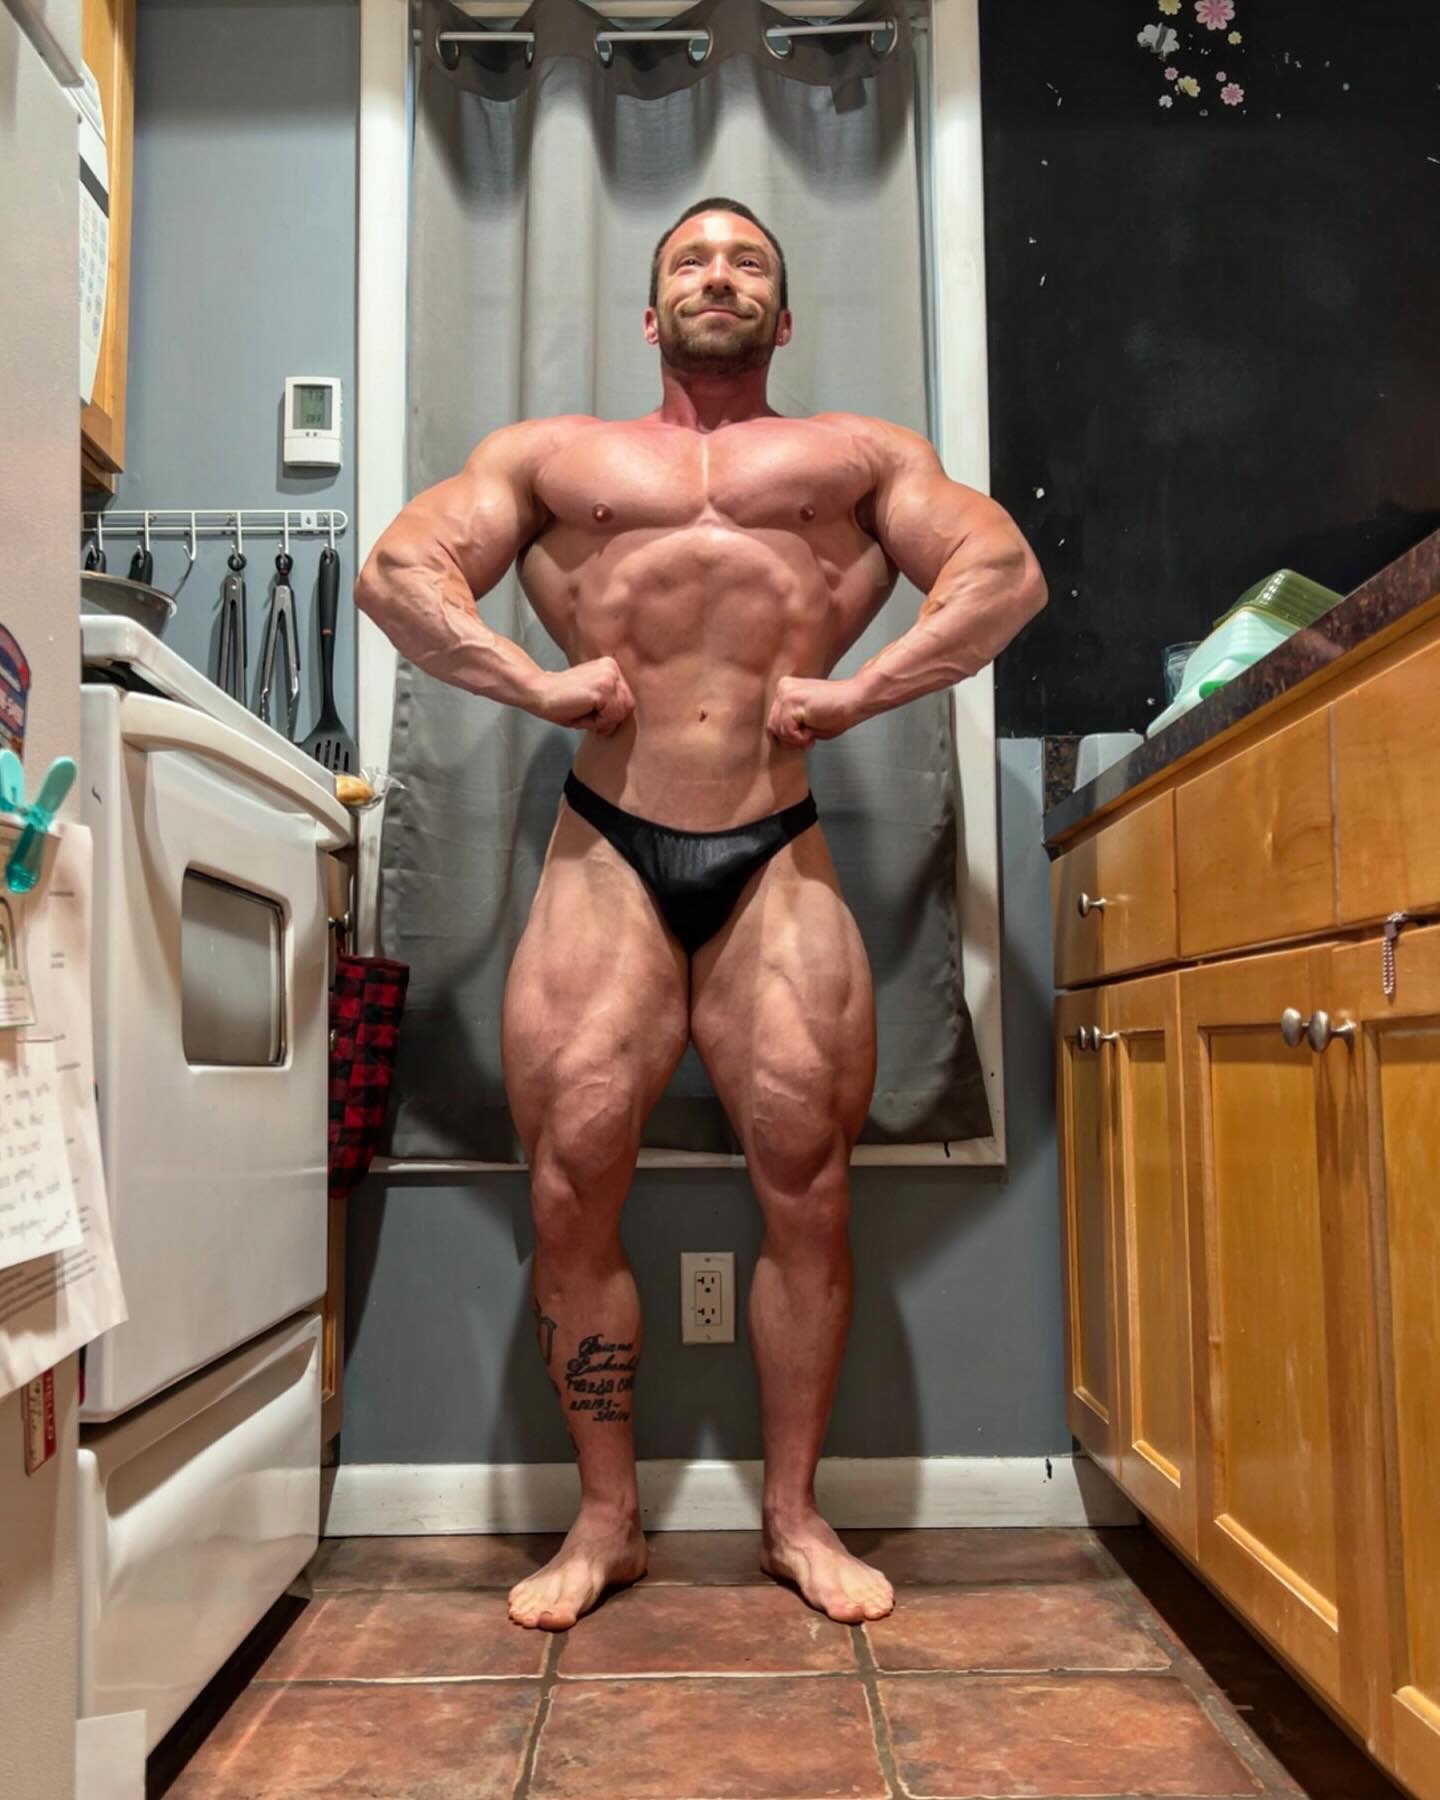 Tunnel vision… 13 days out 
.
@axeandsledge 
@sethferoce 
@sethferoce2.0 
@deanperrone , post show cooking ideas inspired by you 👍🏼

#tunnelvision #13daysout #2weeksout #quads #veins #npc #jrusas #procard #doagoodjob #axeandsledge #rawnutrition #classicphysique #bodybuilding #shredded #quadzilla #quadlife #abs